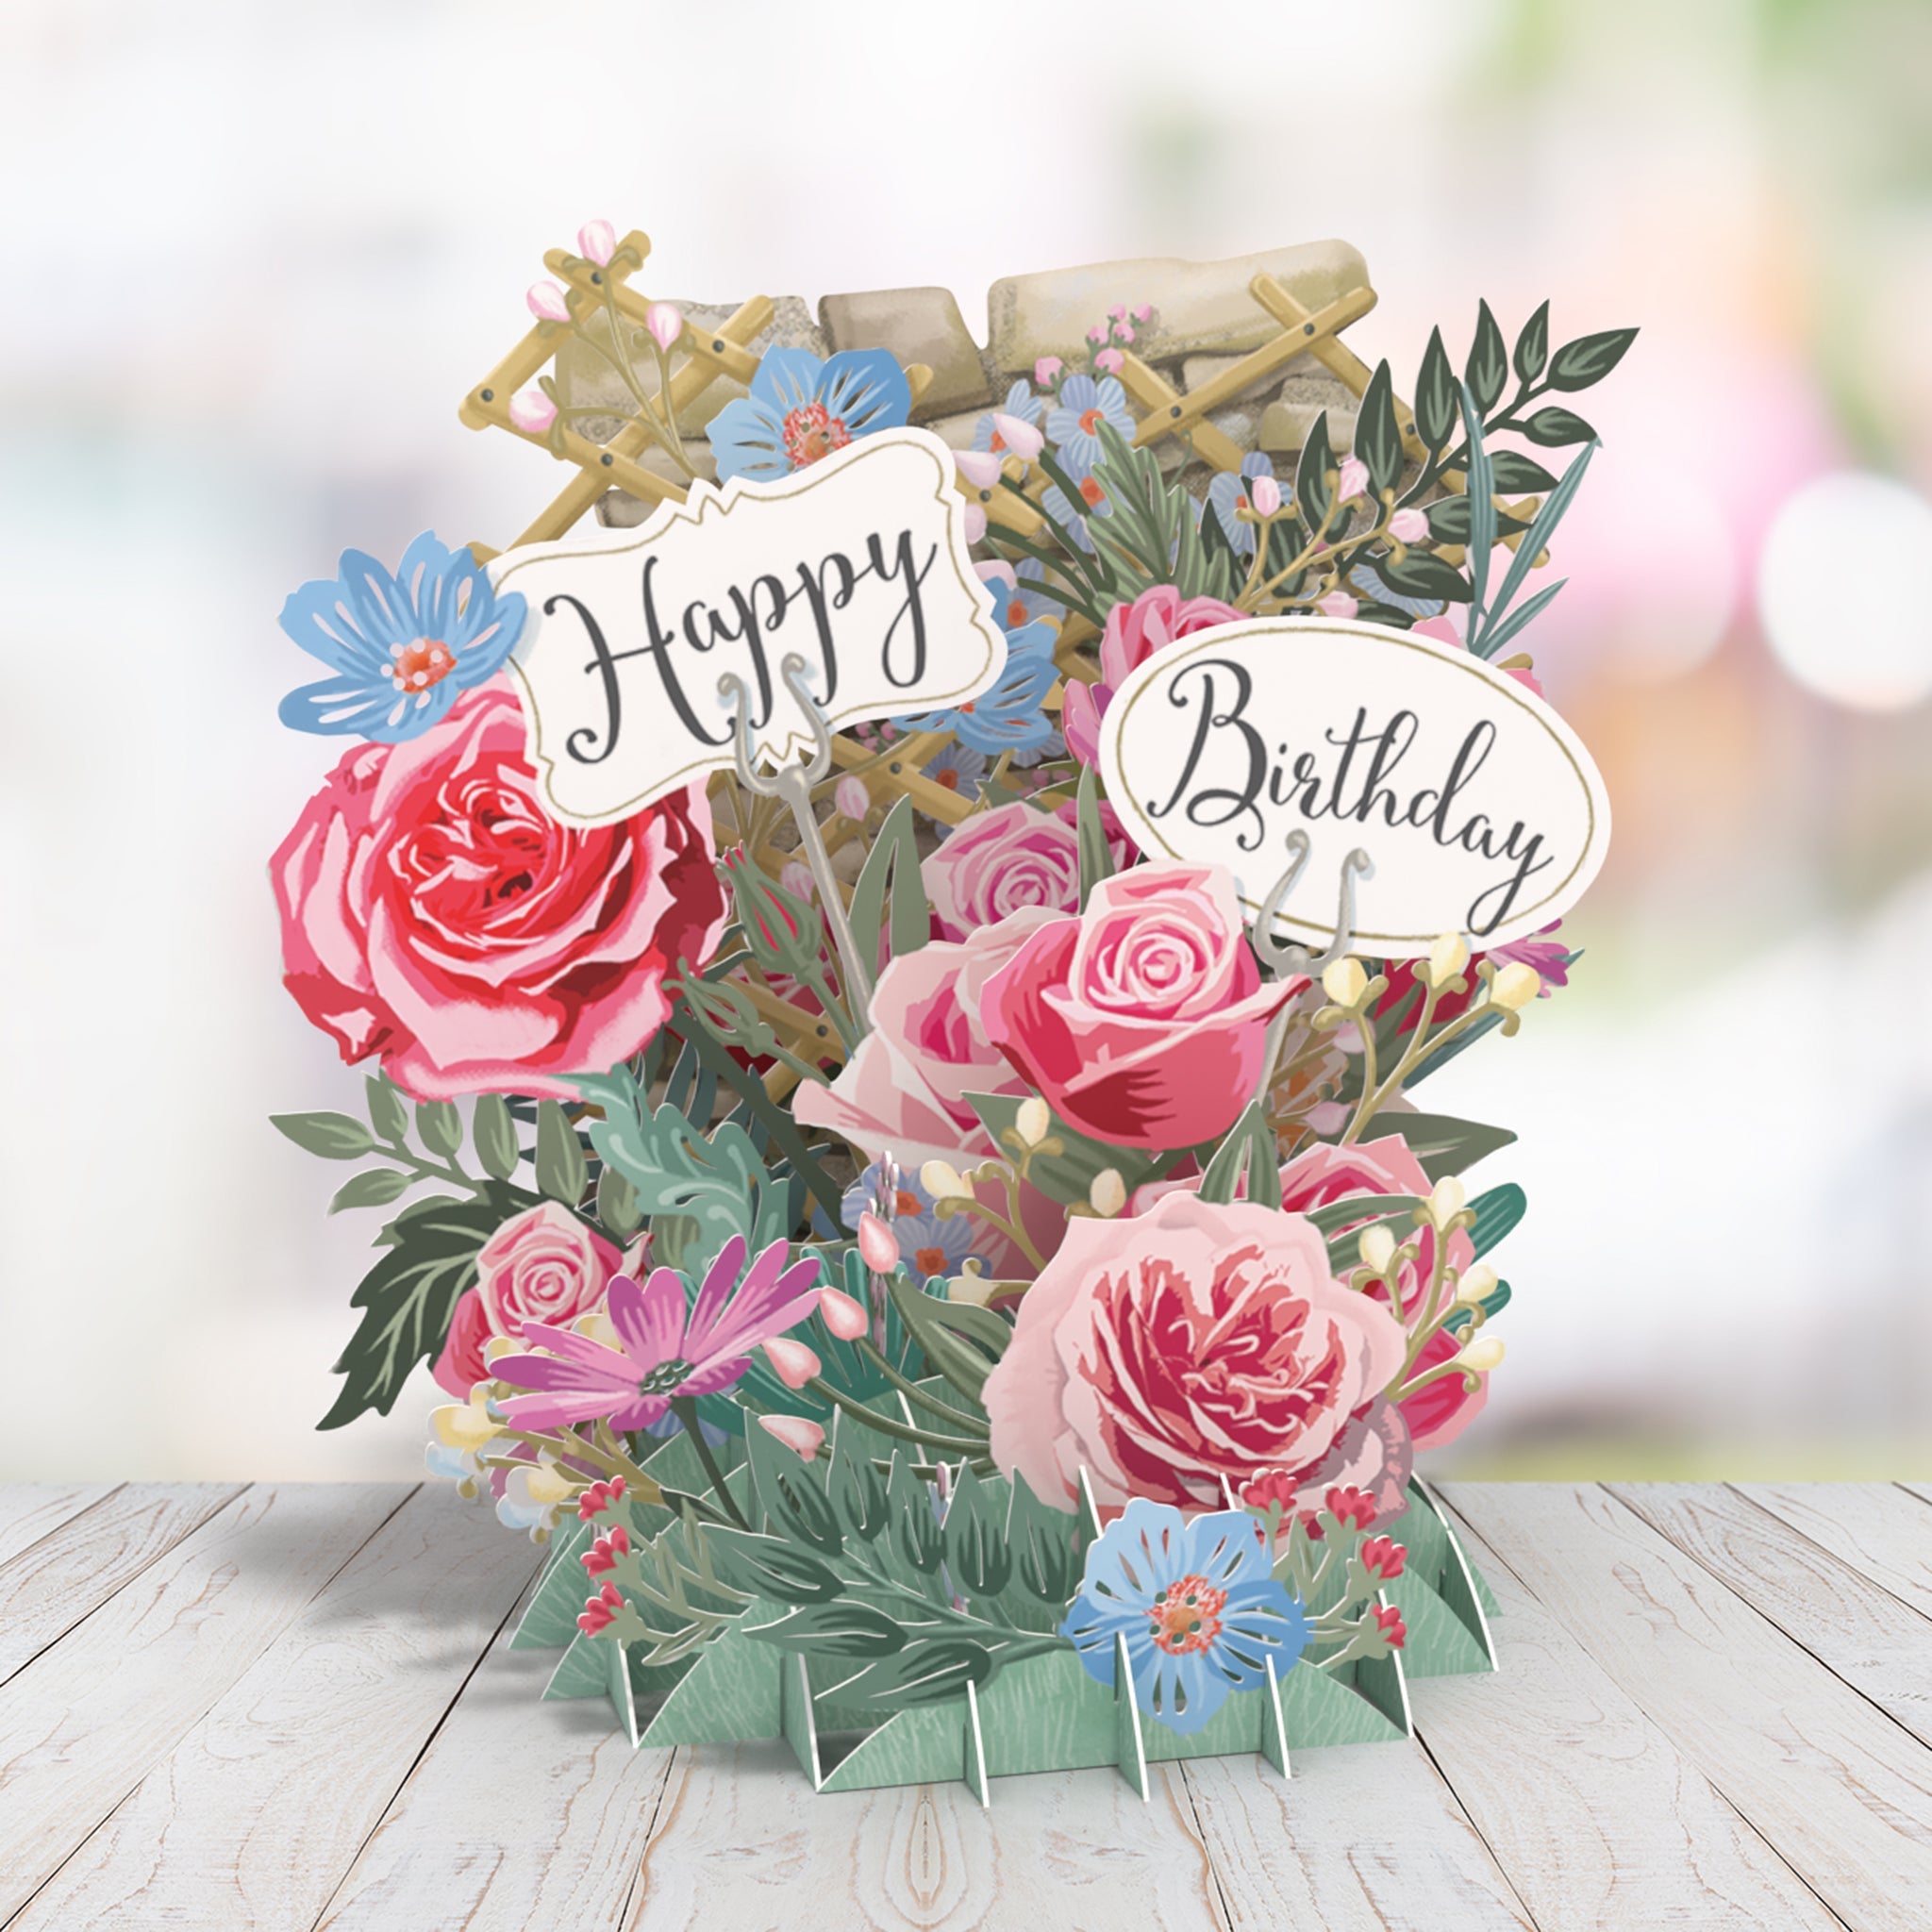 Happy Birthday Roses - 3D Pop Up Greetings Card